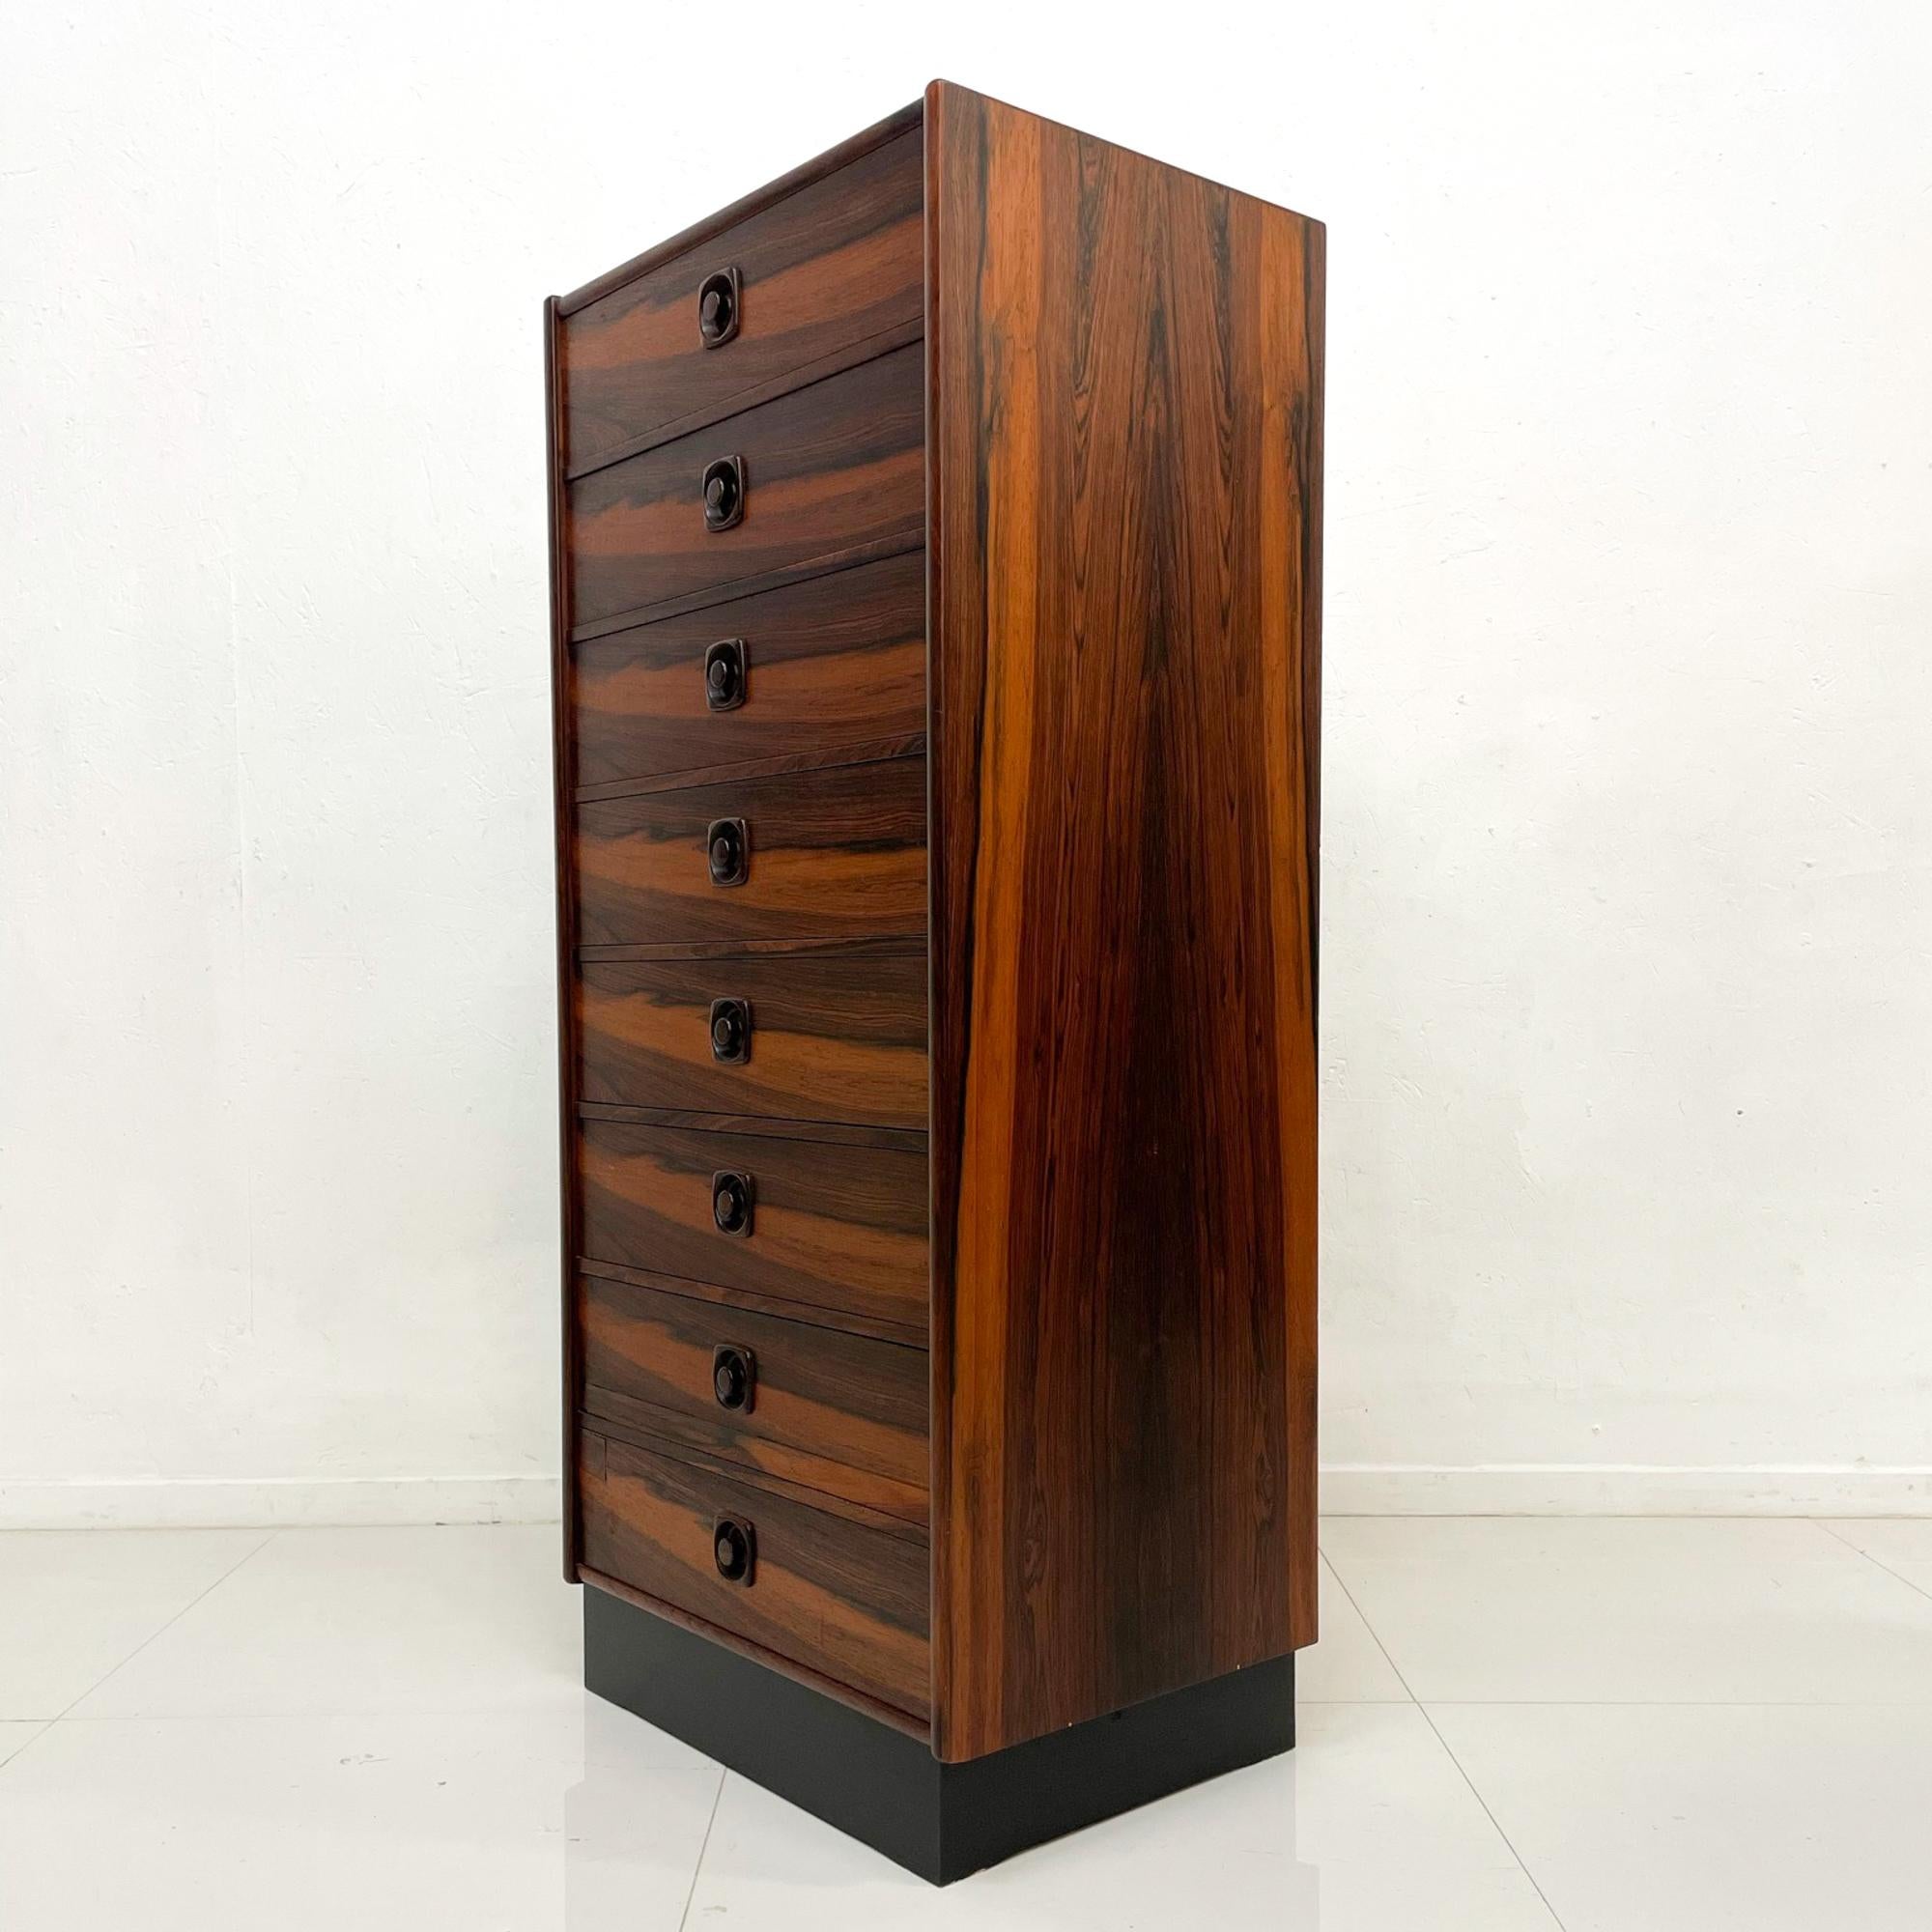 For your consideration, a tall chest of drawers dresser, cabinet. Made in Sweden circa the 1970s. From the period of Scandinavia Modern, Danish Mid-Century Modern.

Constructed with brazilian rosewood. A total of eight (8) drawers. All the drawers